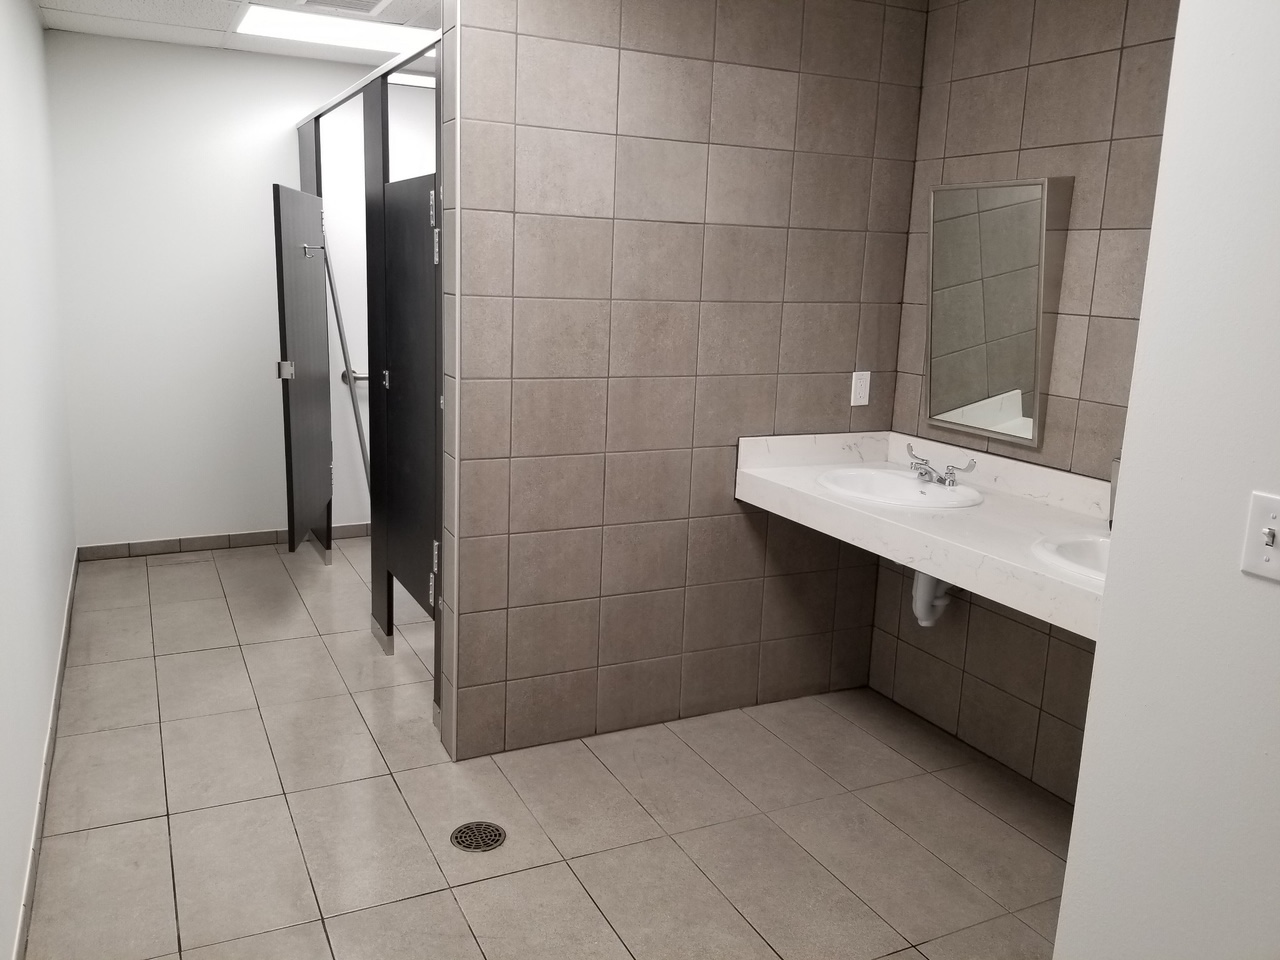 Photo of commercial restroom remodel. Shows tile flooring and walls with new sink and bathroom stalls.